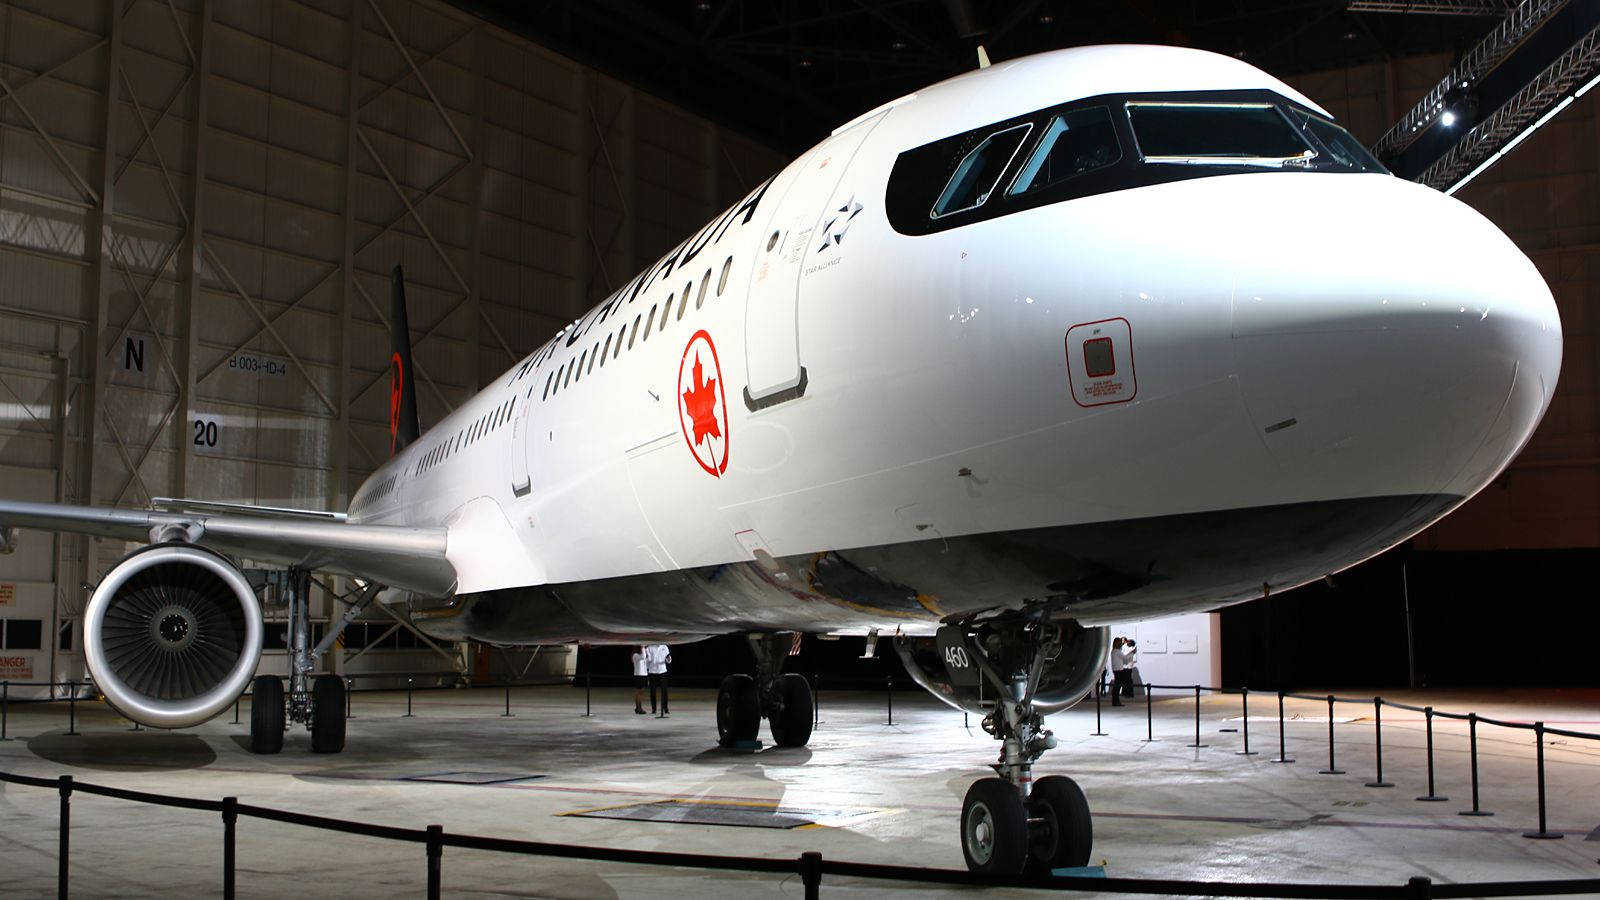 Up Close with Air Canada in the Hangar Wallpaper